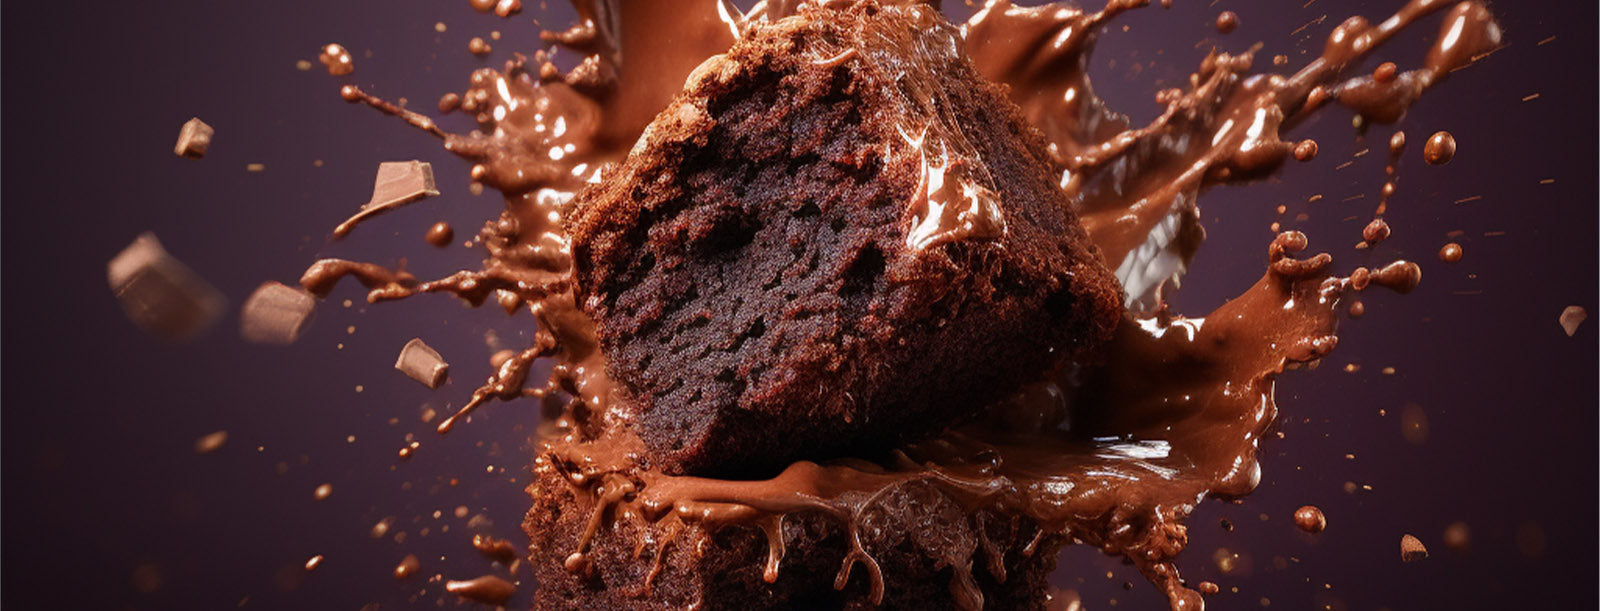 A delicious brownie with chocolate brownie protein bursting out of it